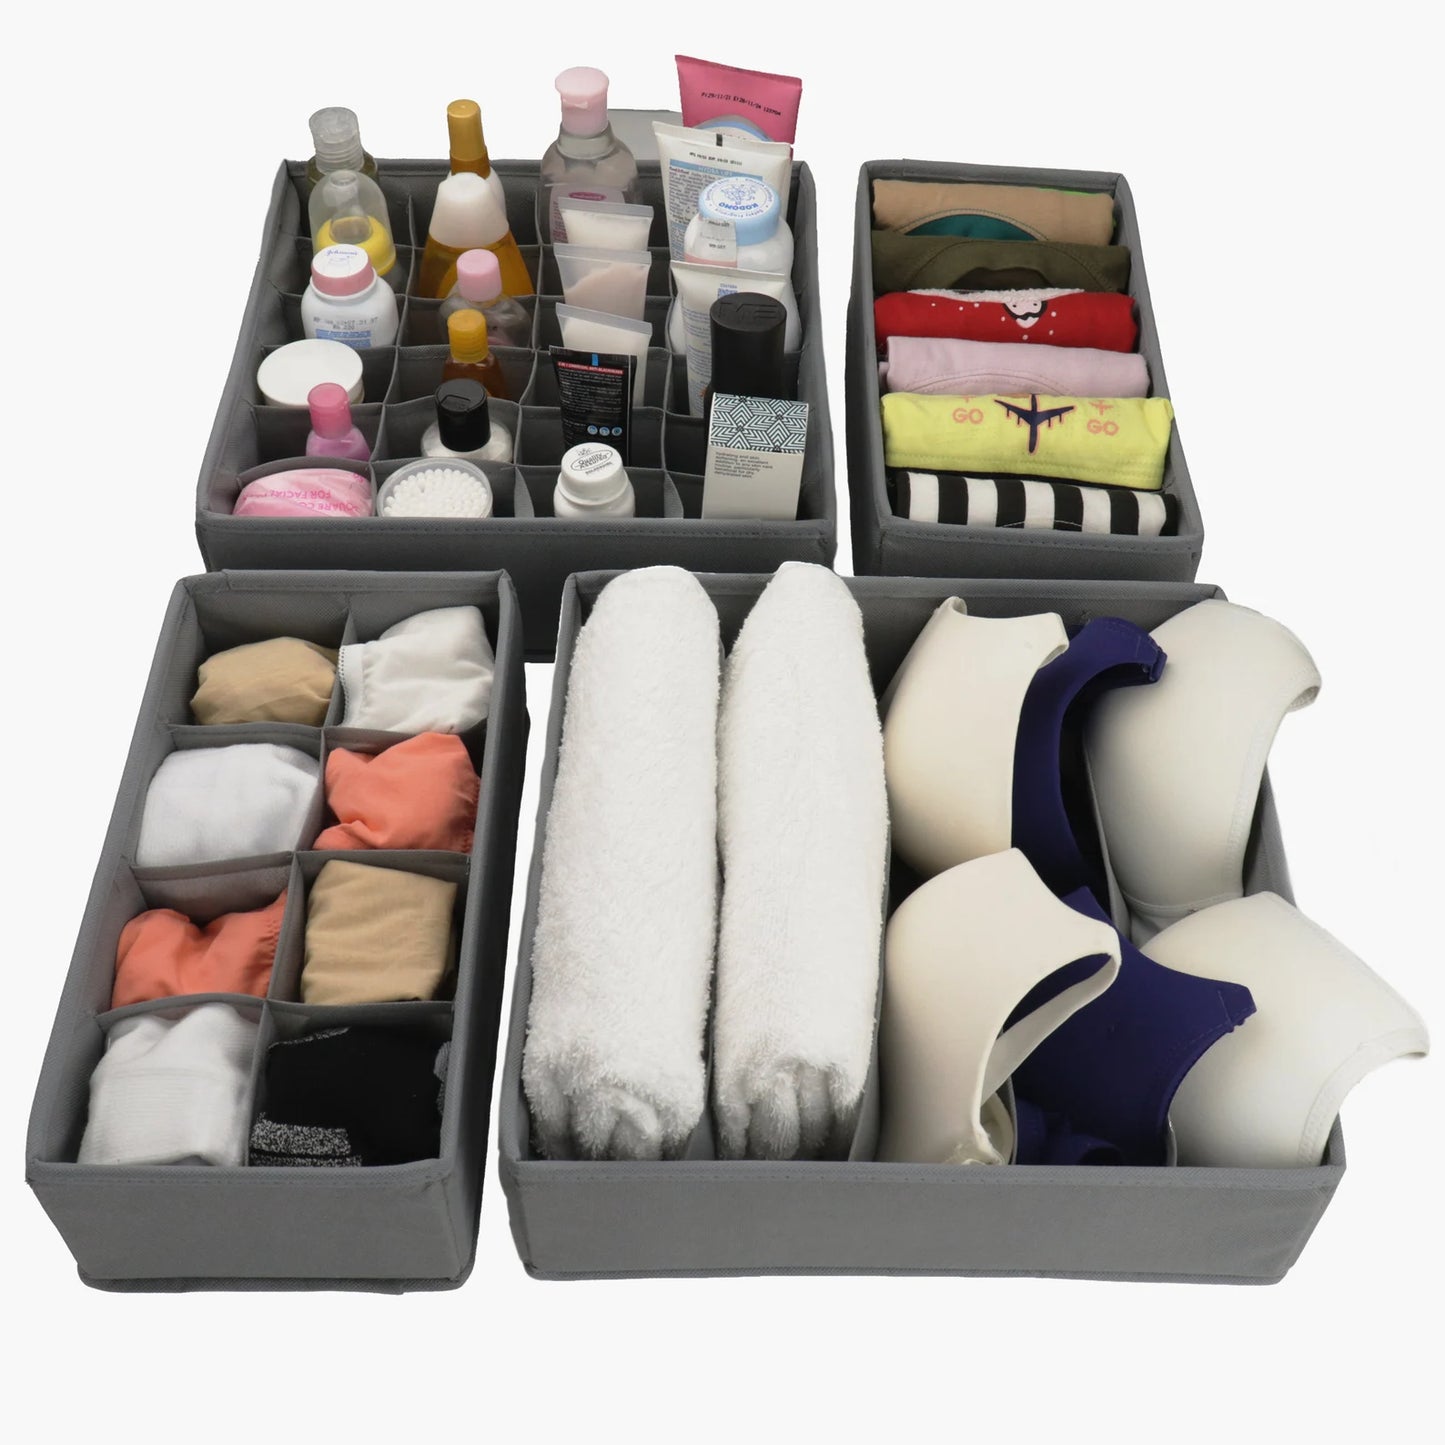 Qoolish 4-Pack Drawer Organizers: Sort and Store in Style! (Available in 5 Colors) - Qoolish